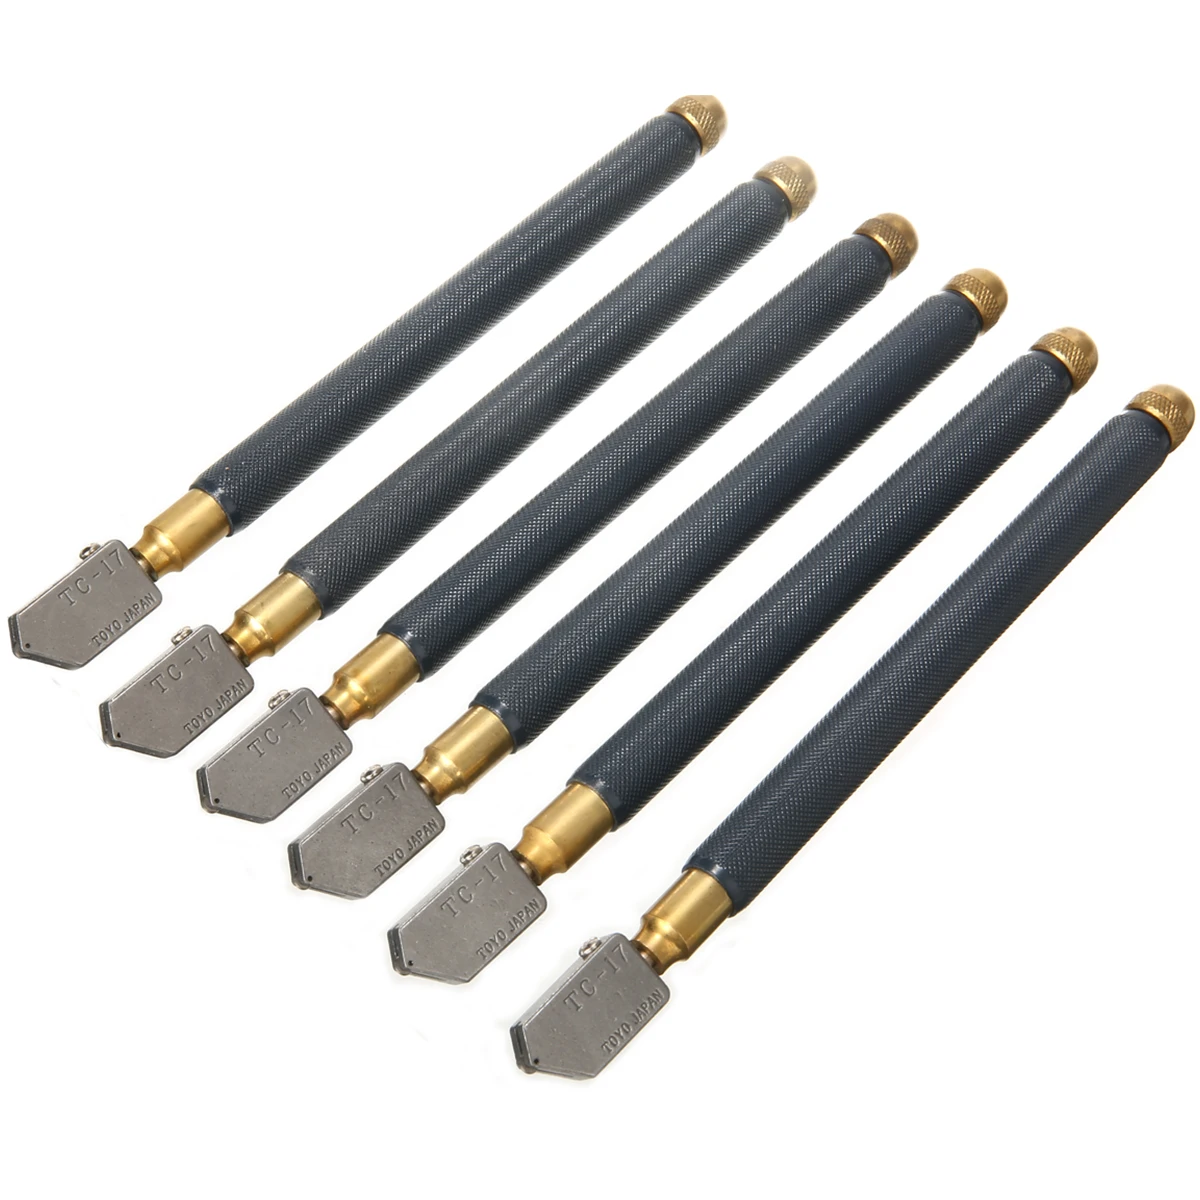 6pcs/Set 5-12mm Cutting Thickness Cutters 180mm Length Metal Handle Diamond Straight Head Cutting Tool for Cutting Glass Tile